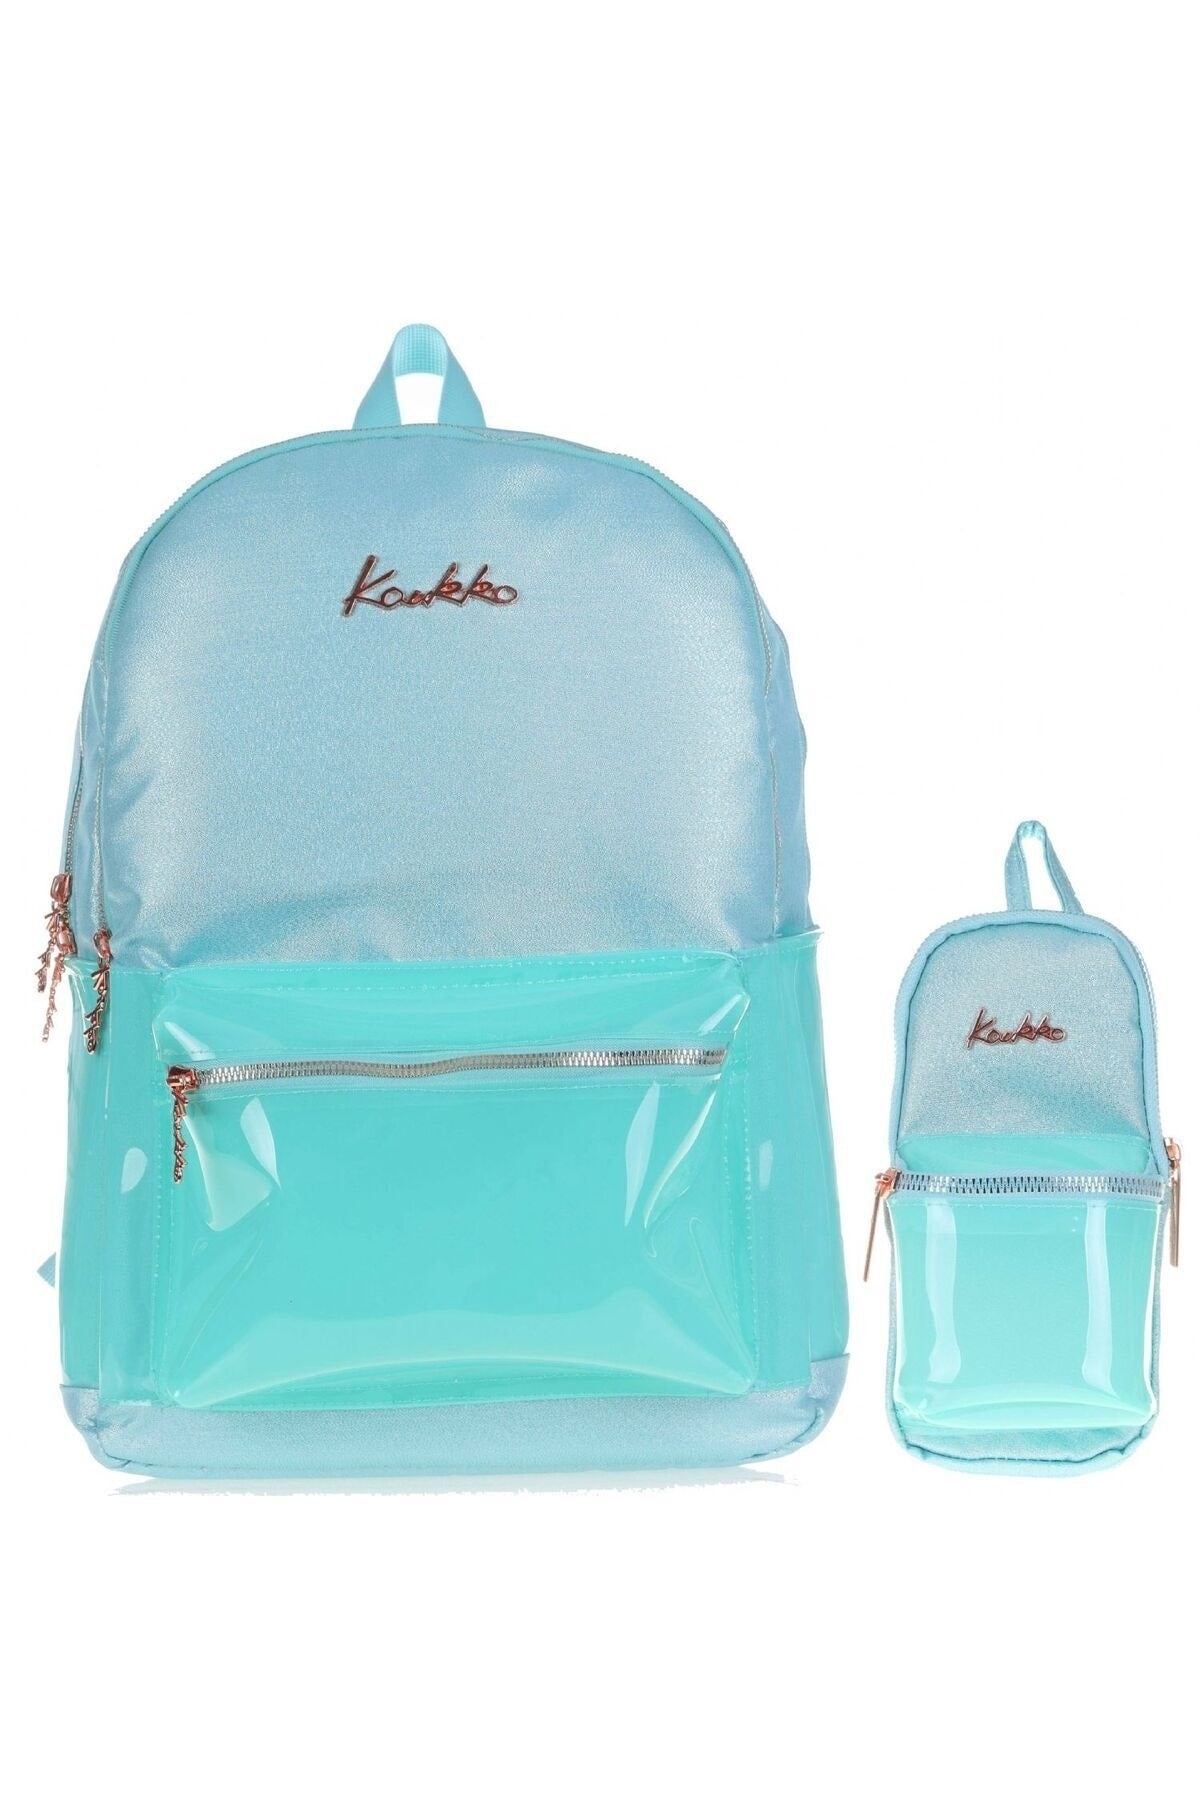 Transparent Turquoise School Backpack and Pencil Holder Set - Middle School-High School